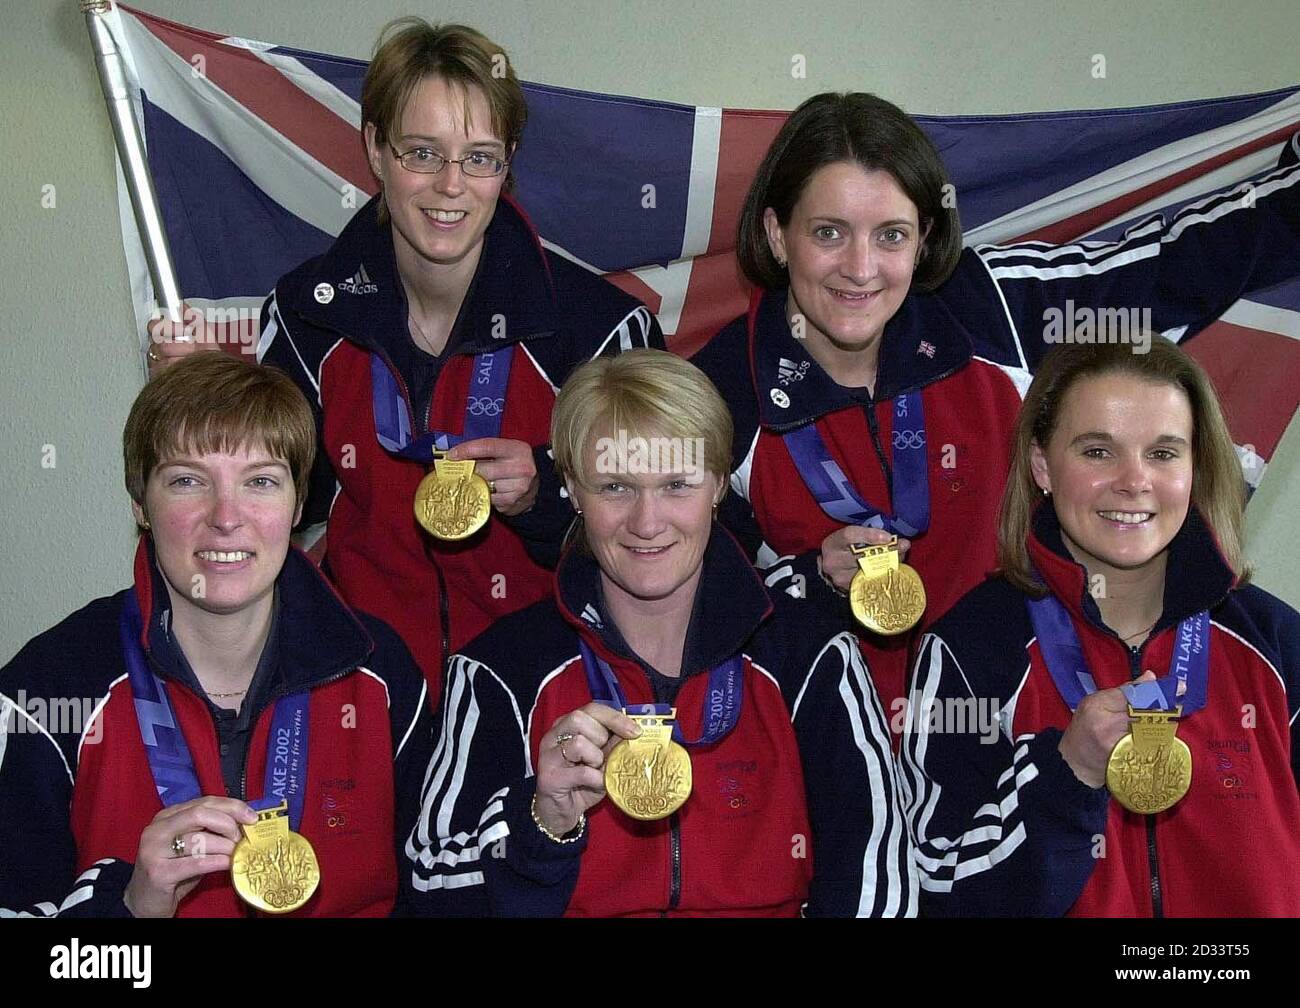 Great Britain's Curling team: Margaret Morton, Janice Rankin, Rhona Martin, Debbie Knox and Fiona Macdonald,  arrive at London's Heathrow Airport, holding the Gold Medals that they won during the Winter Olympics at Salt Lake City.   *14/06/02 Great Britain's Curling team: Margaret Morton, Janice Rankin, Rhona Martin, Debbie Knox and Fiona Macdonald who has been made MBEs (Members of the Order of the British Empire) in the Queen's Birthday Honours for services to the sport.  Stock Photo